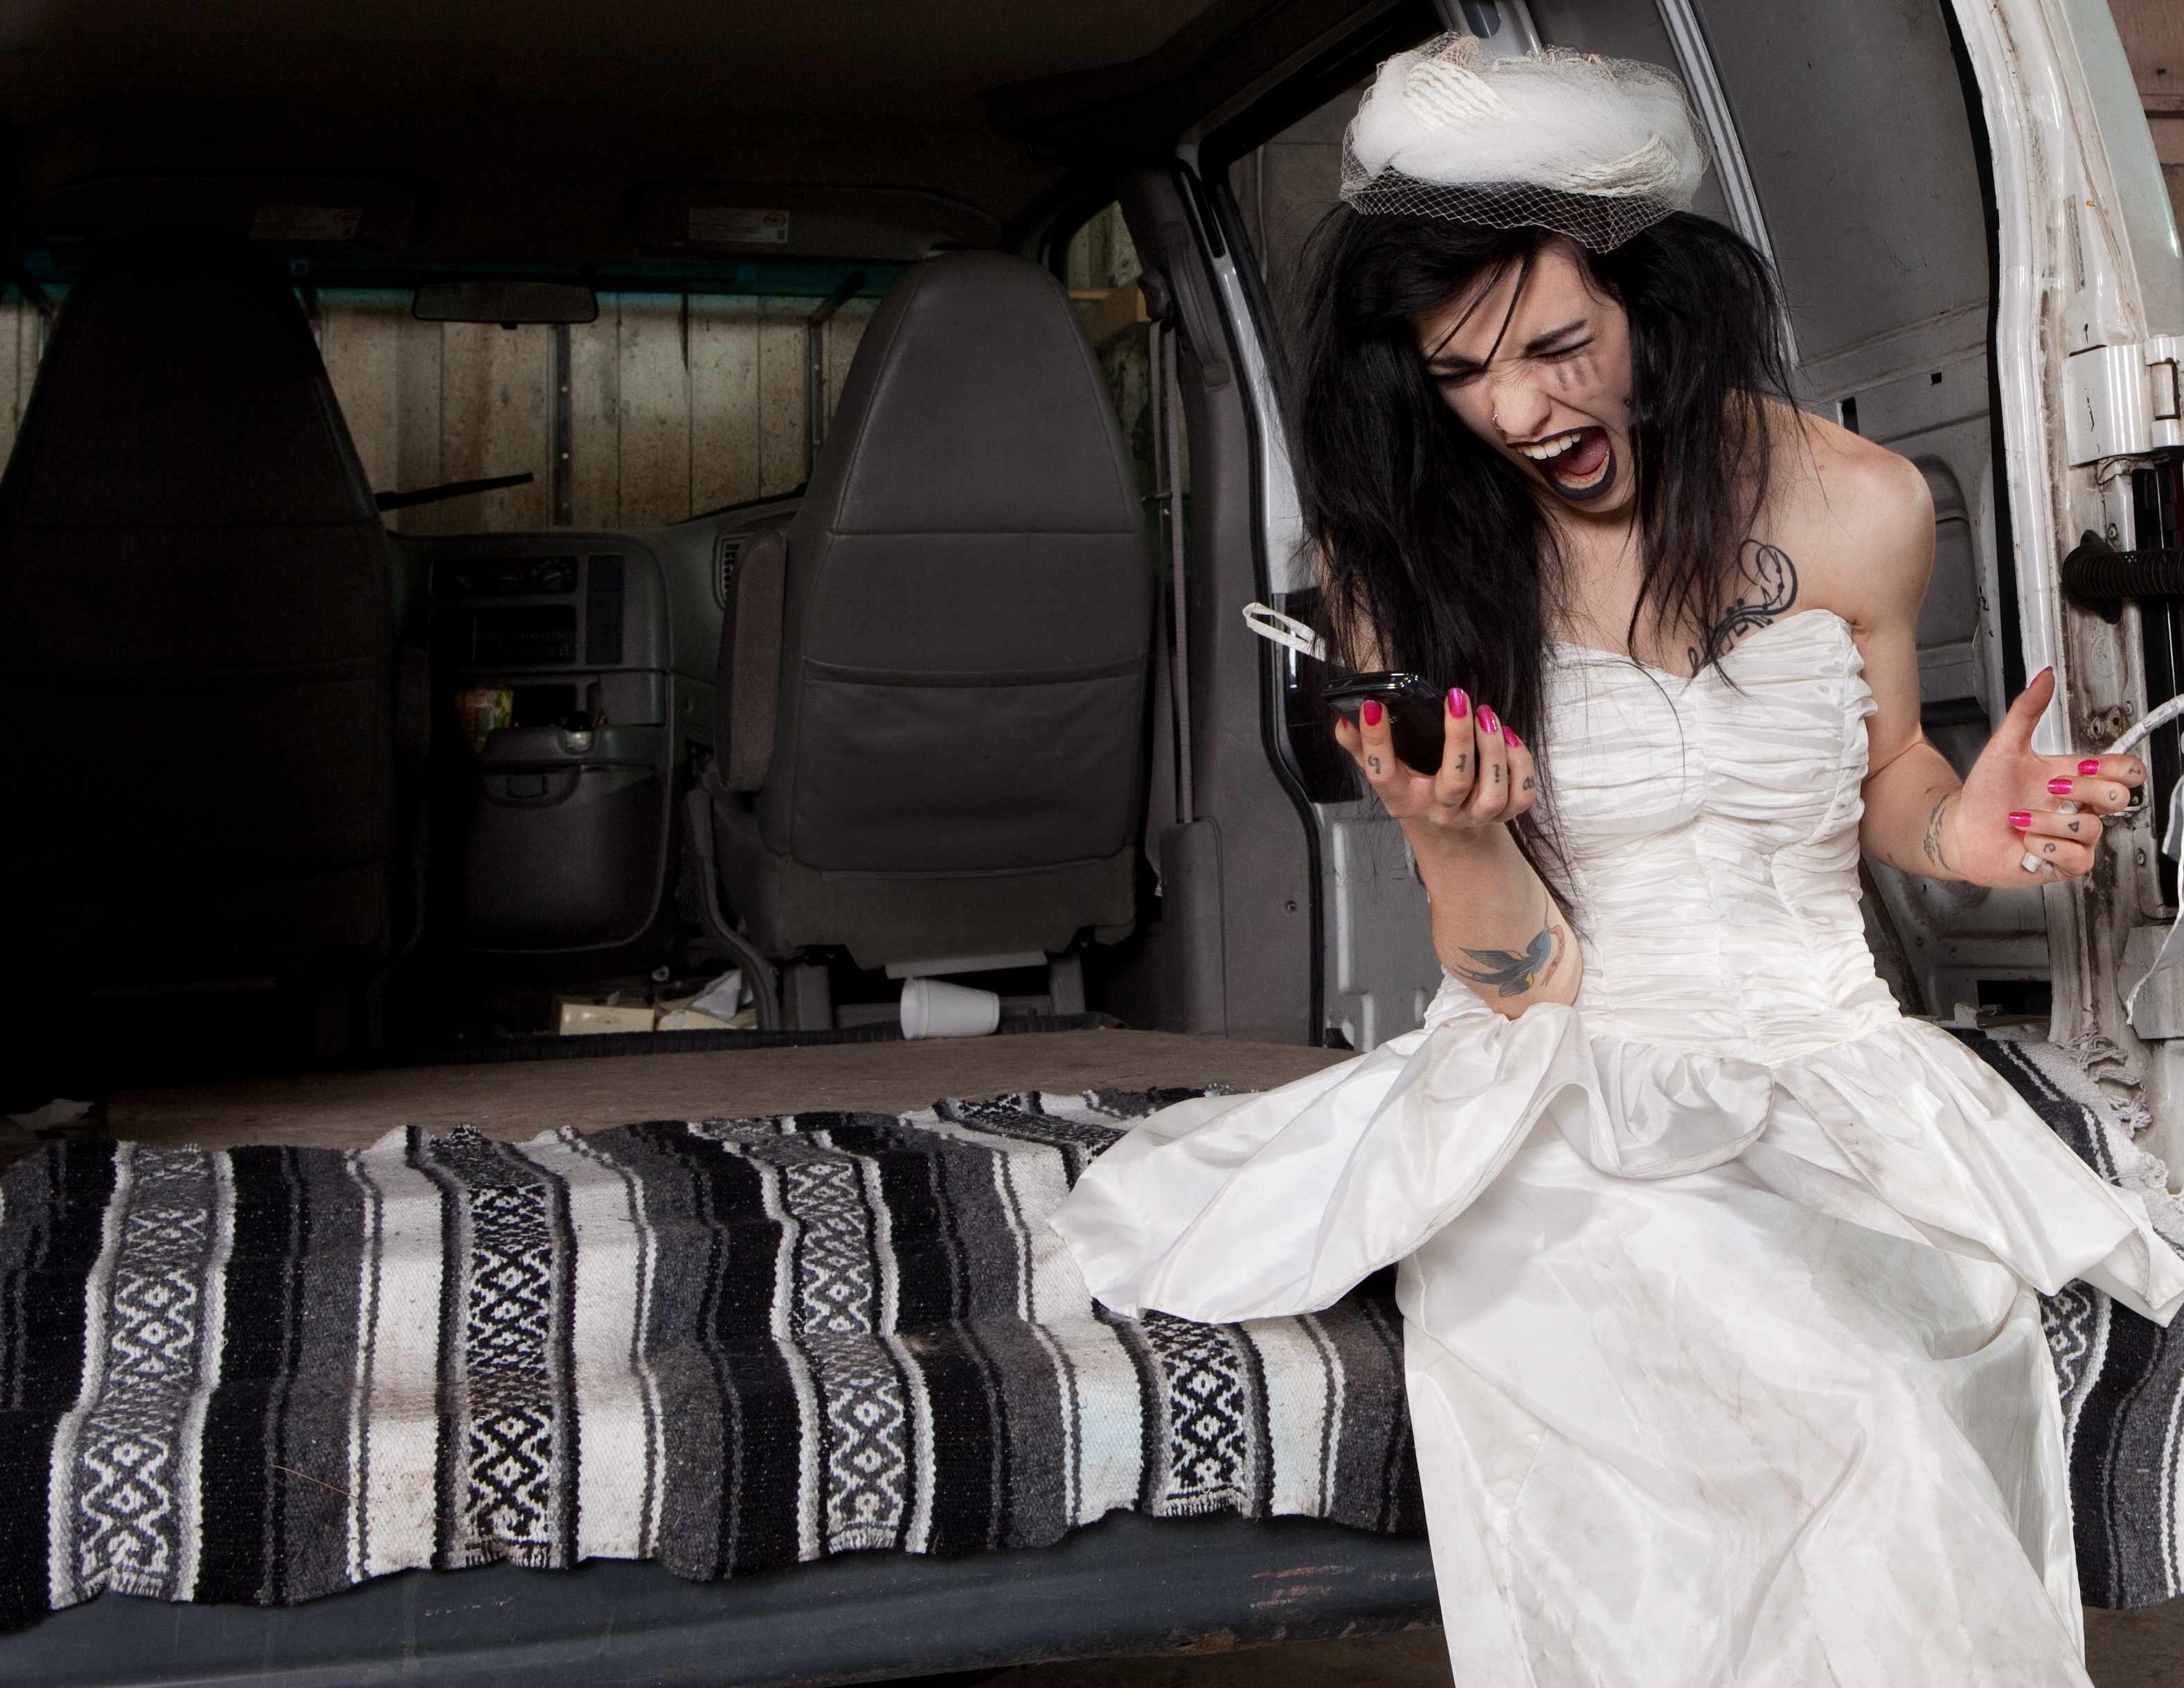 A bride shouts as she talks on the phone | Source: Shutterstock